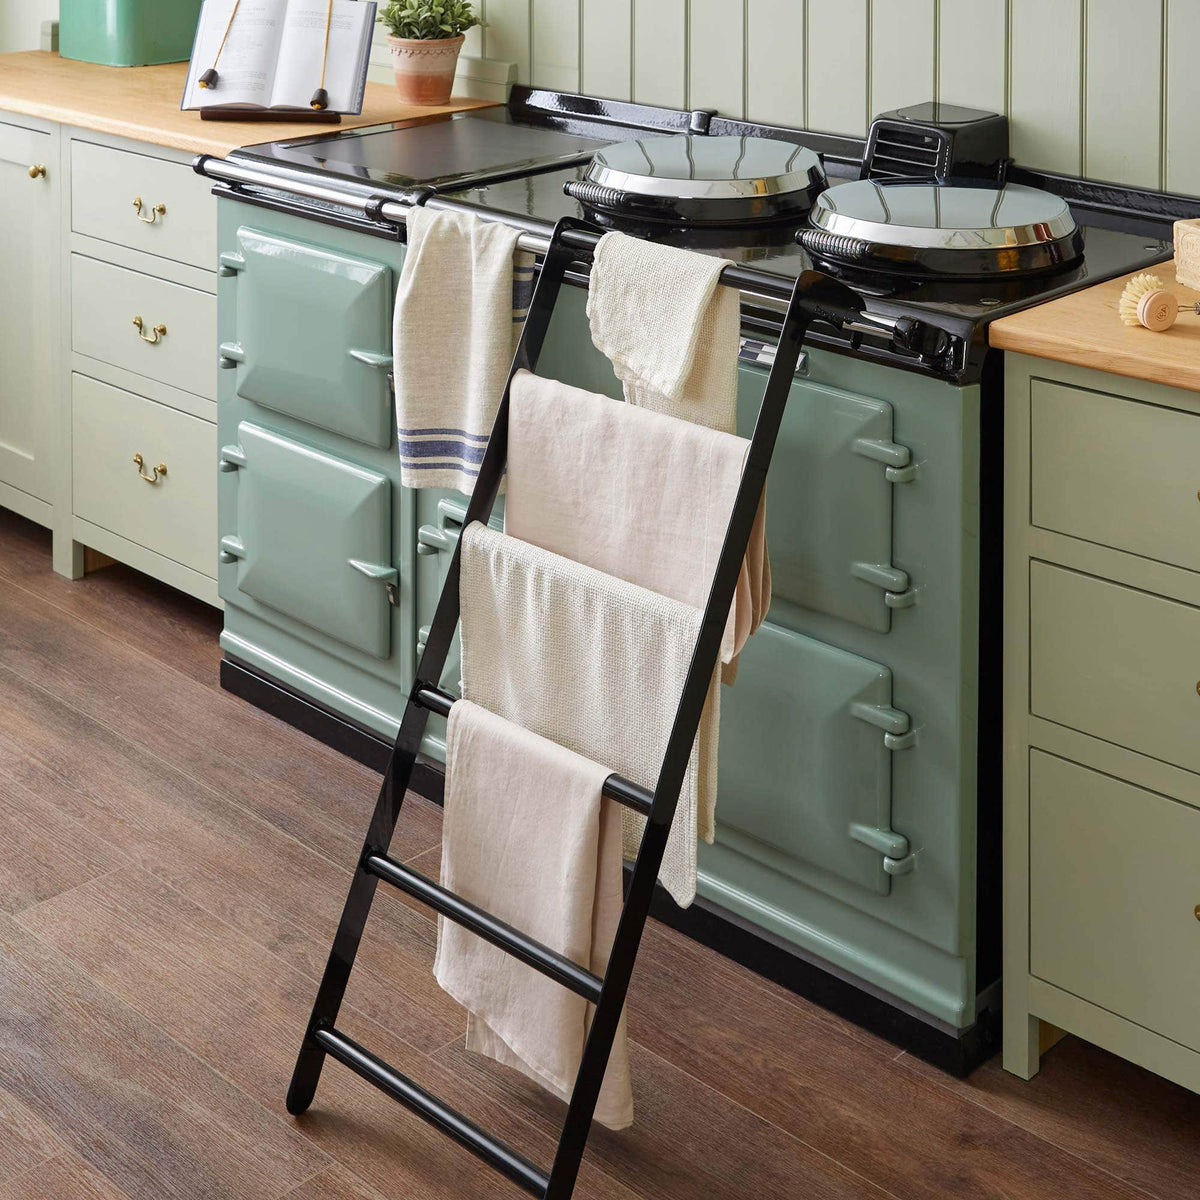 Ladder drying rack airer for use with Aga range cooker (gloss black)